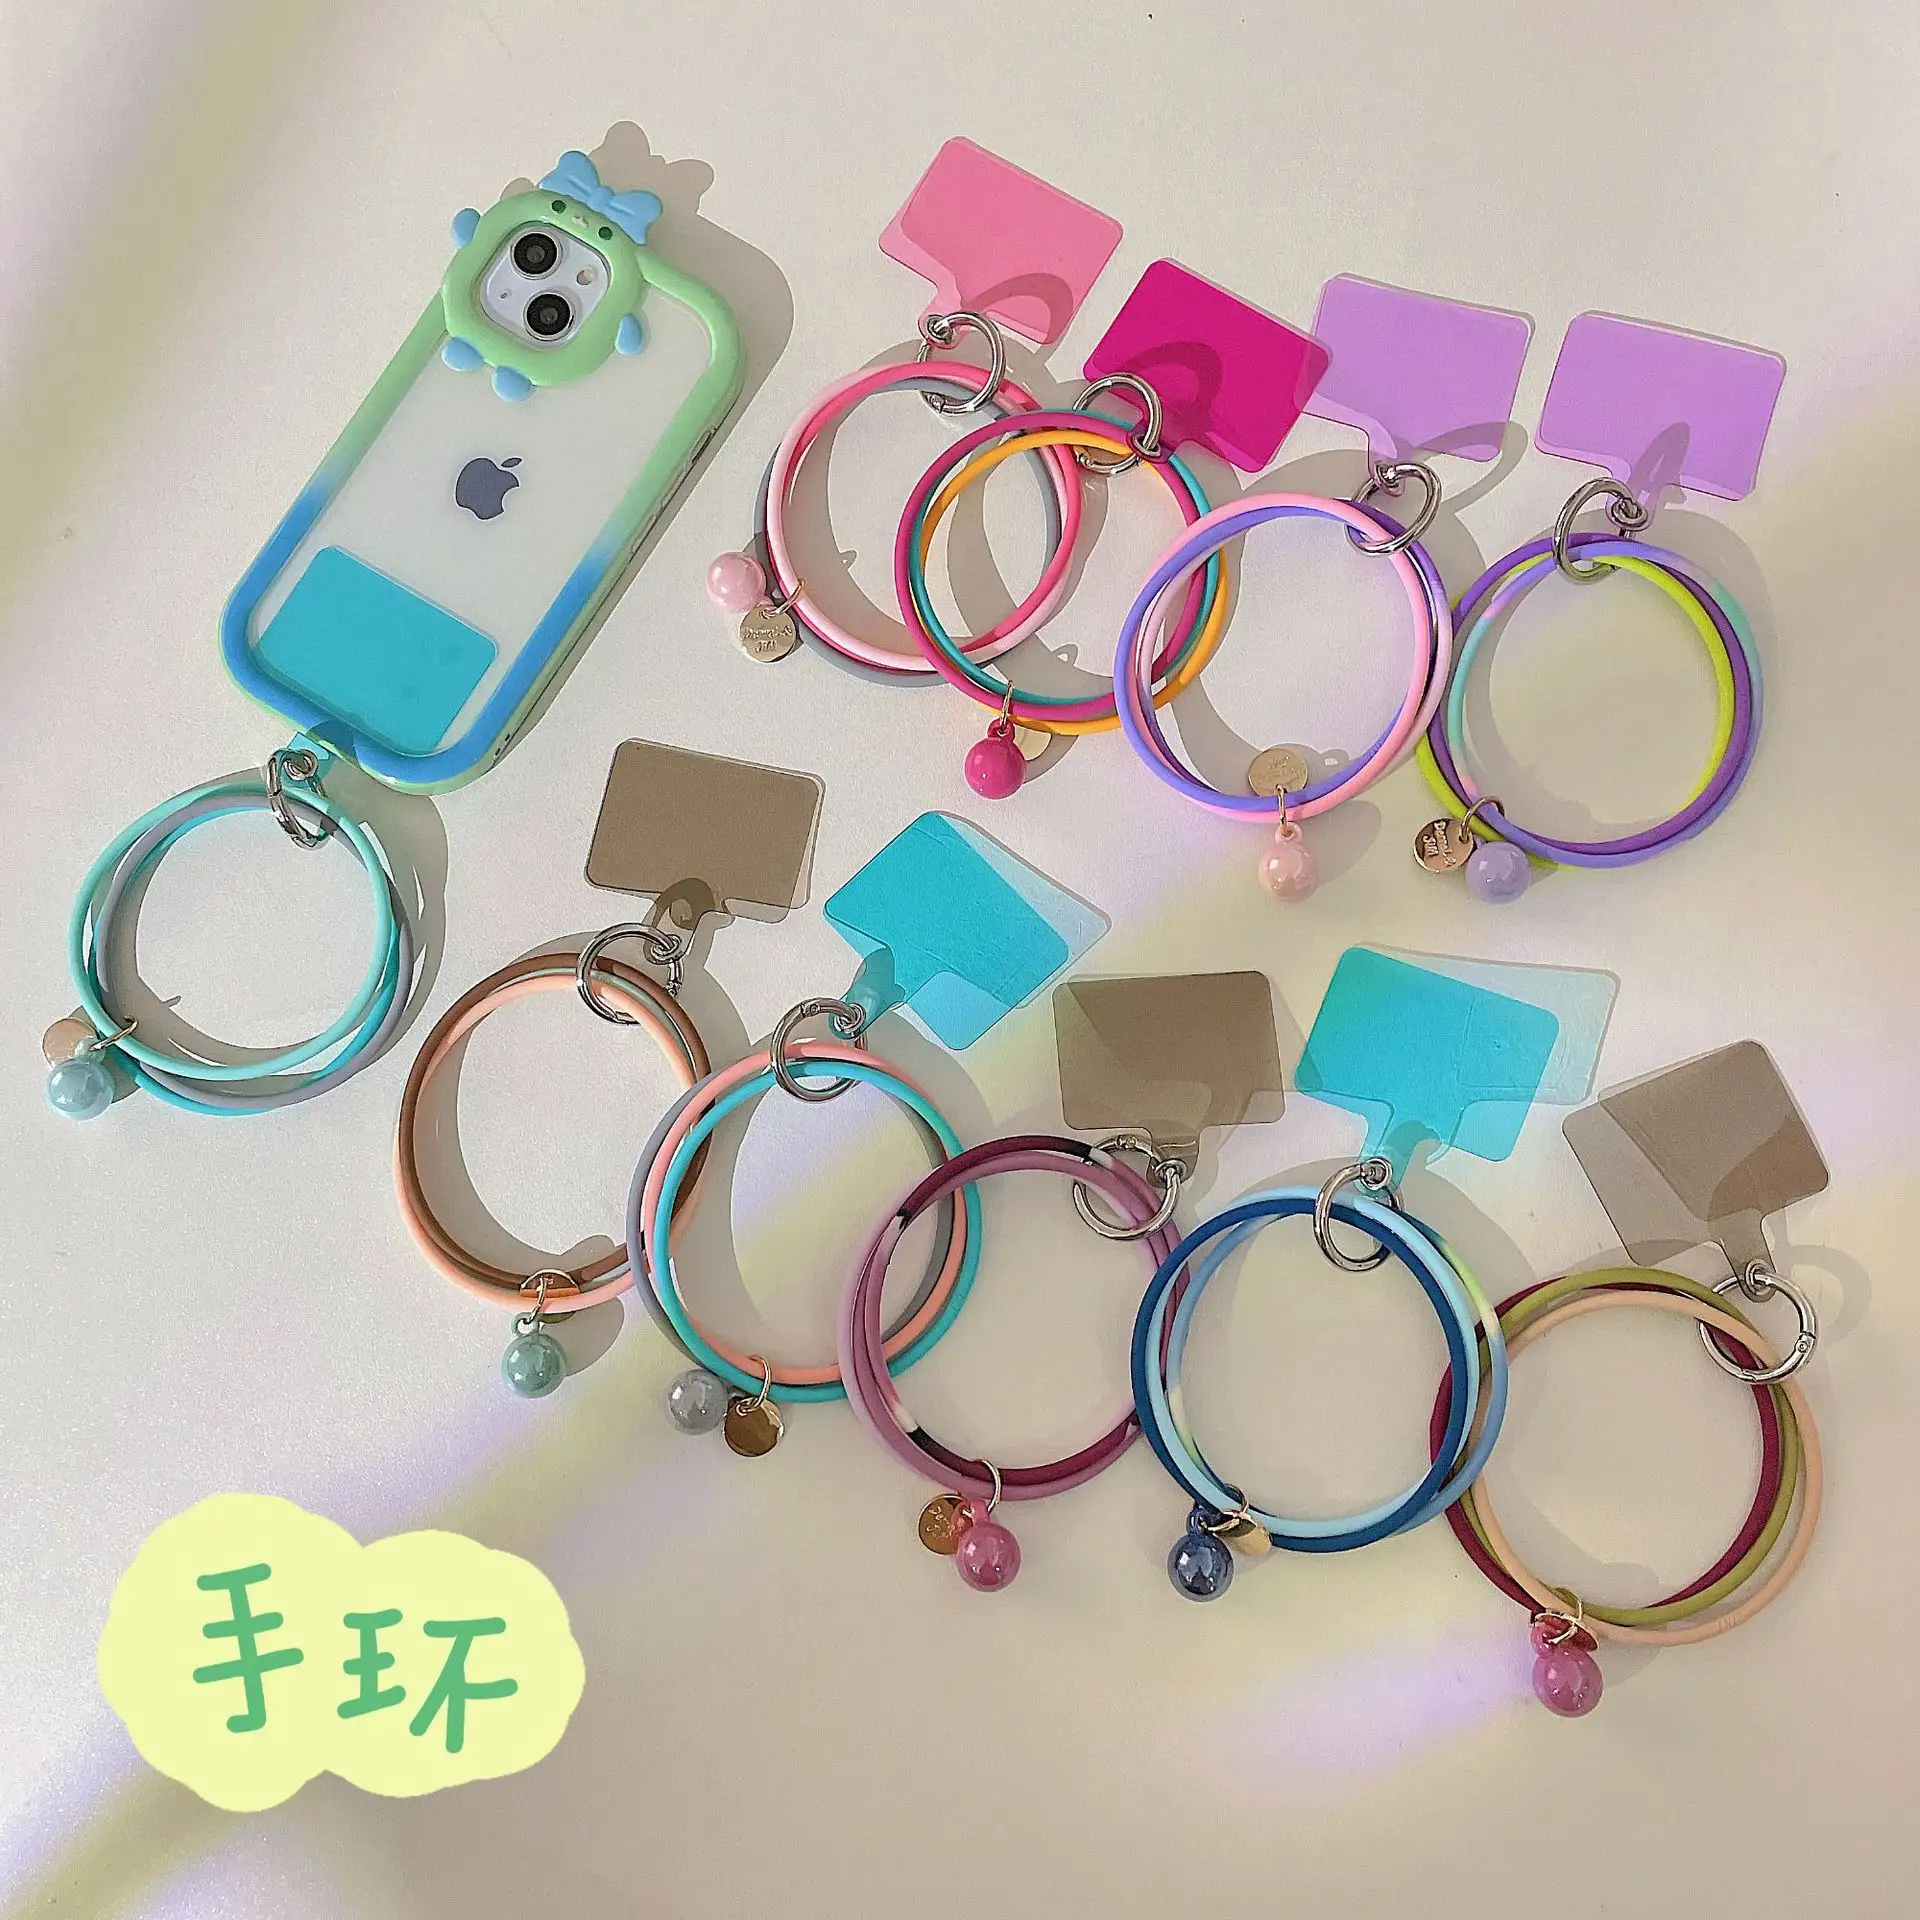 New Detachable silicone cell phone wristlet Holder clear Patch Universal Phone silicone Straps for Iphone Mobile Case